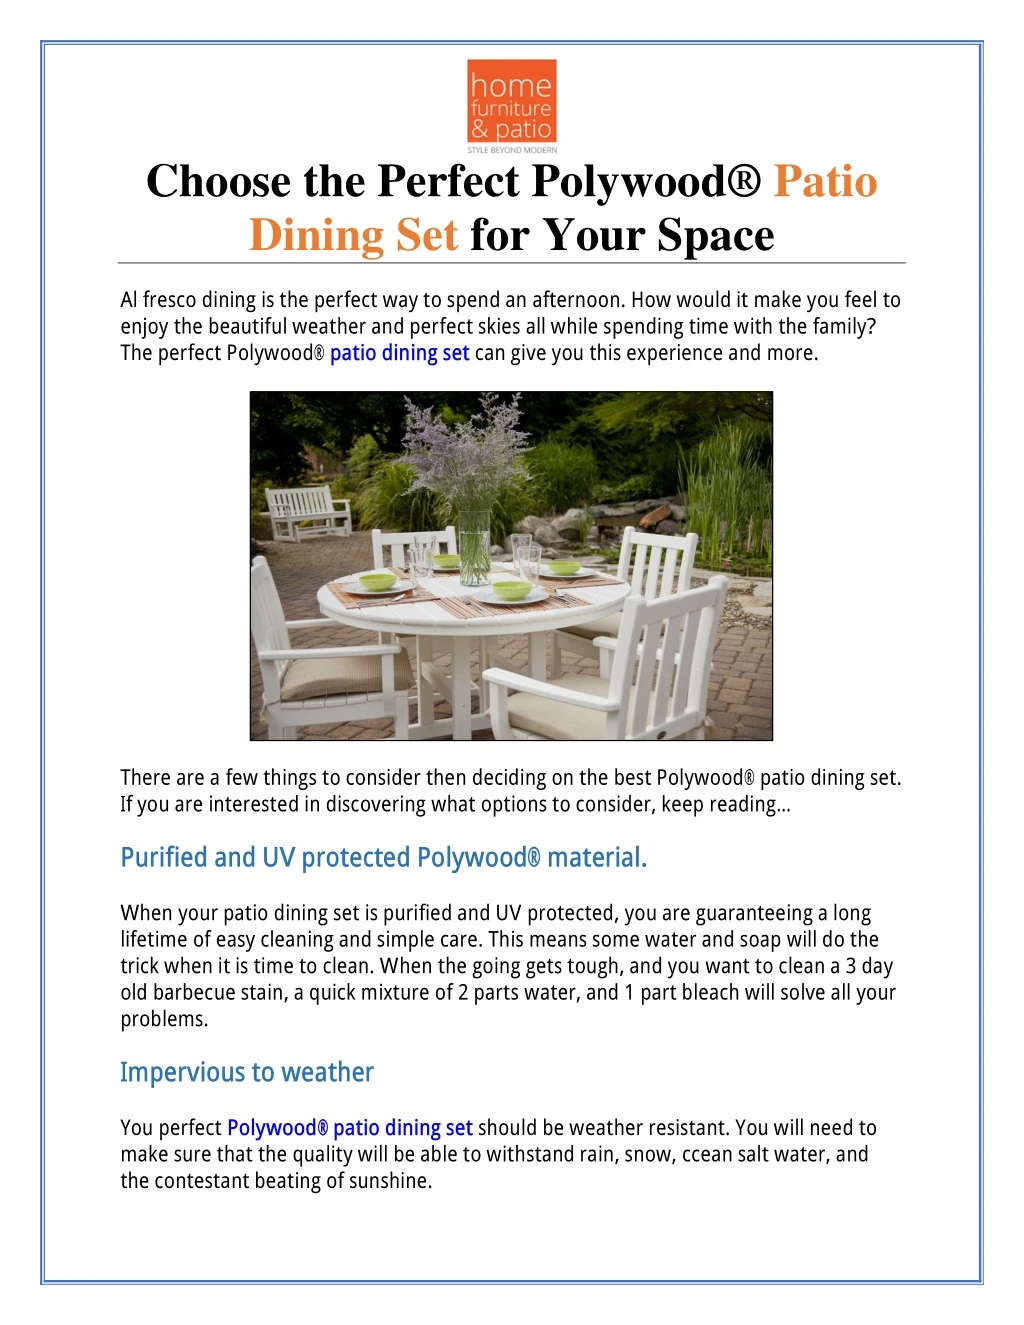 choose the perfect polywood patio dining